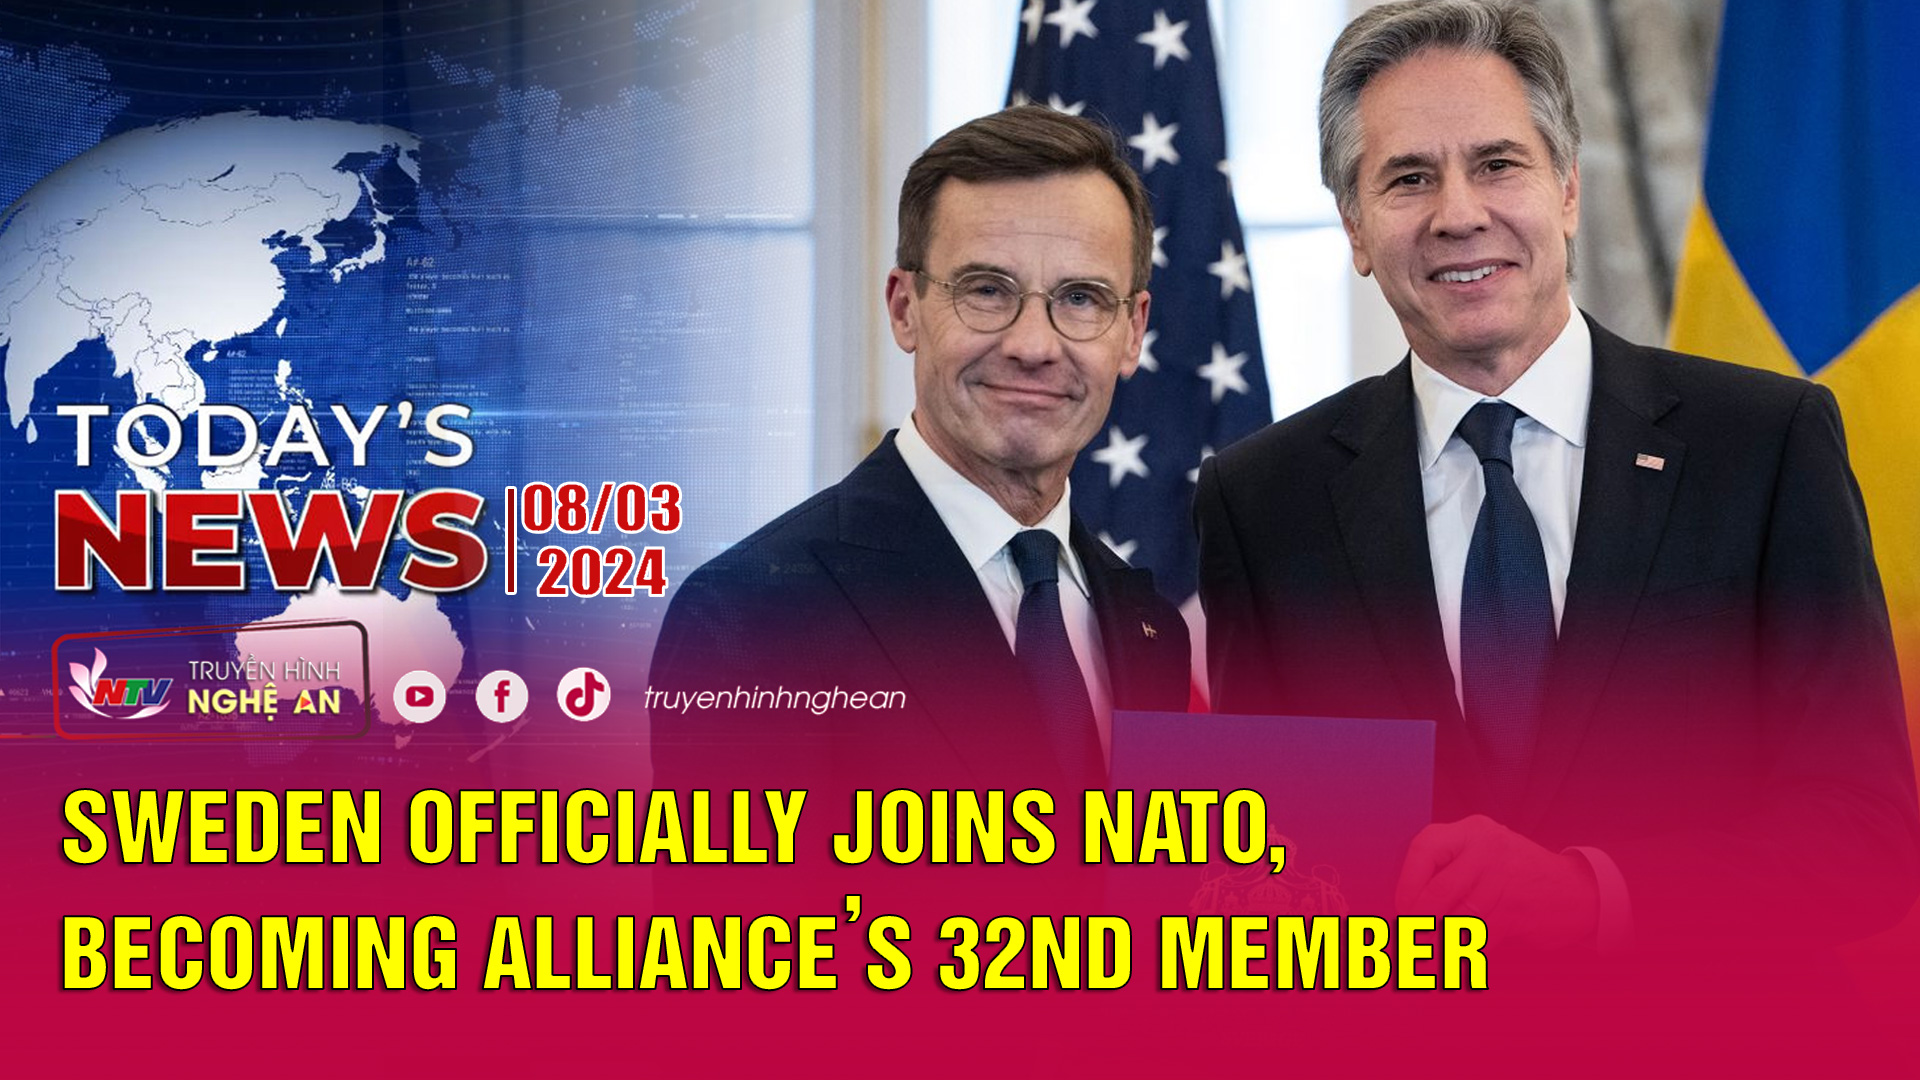 Today's News 08/03/2024: Sweden officially joins NATO, becoming alliance’s 32nd member